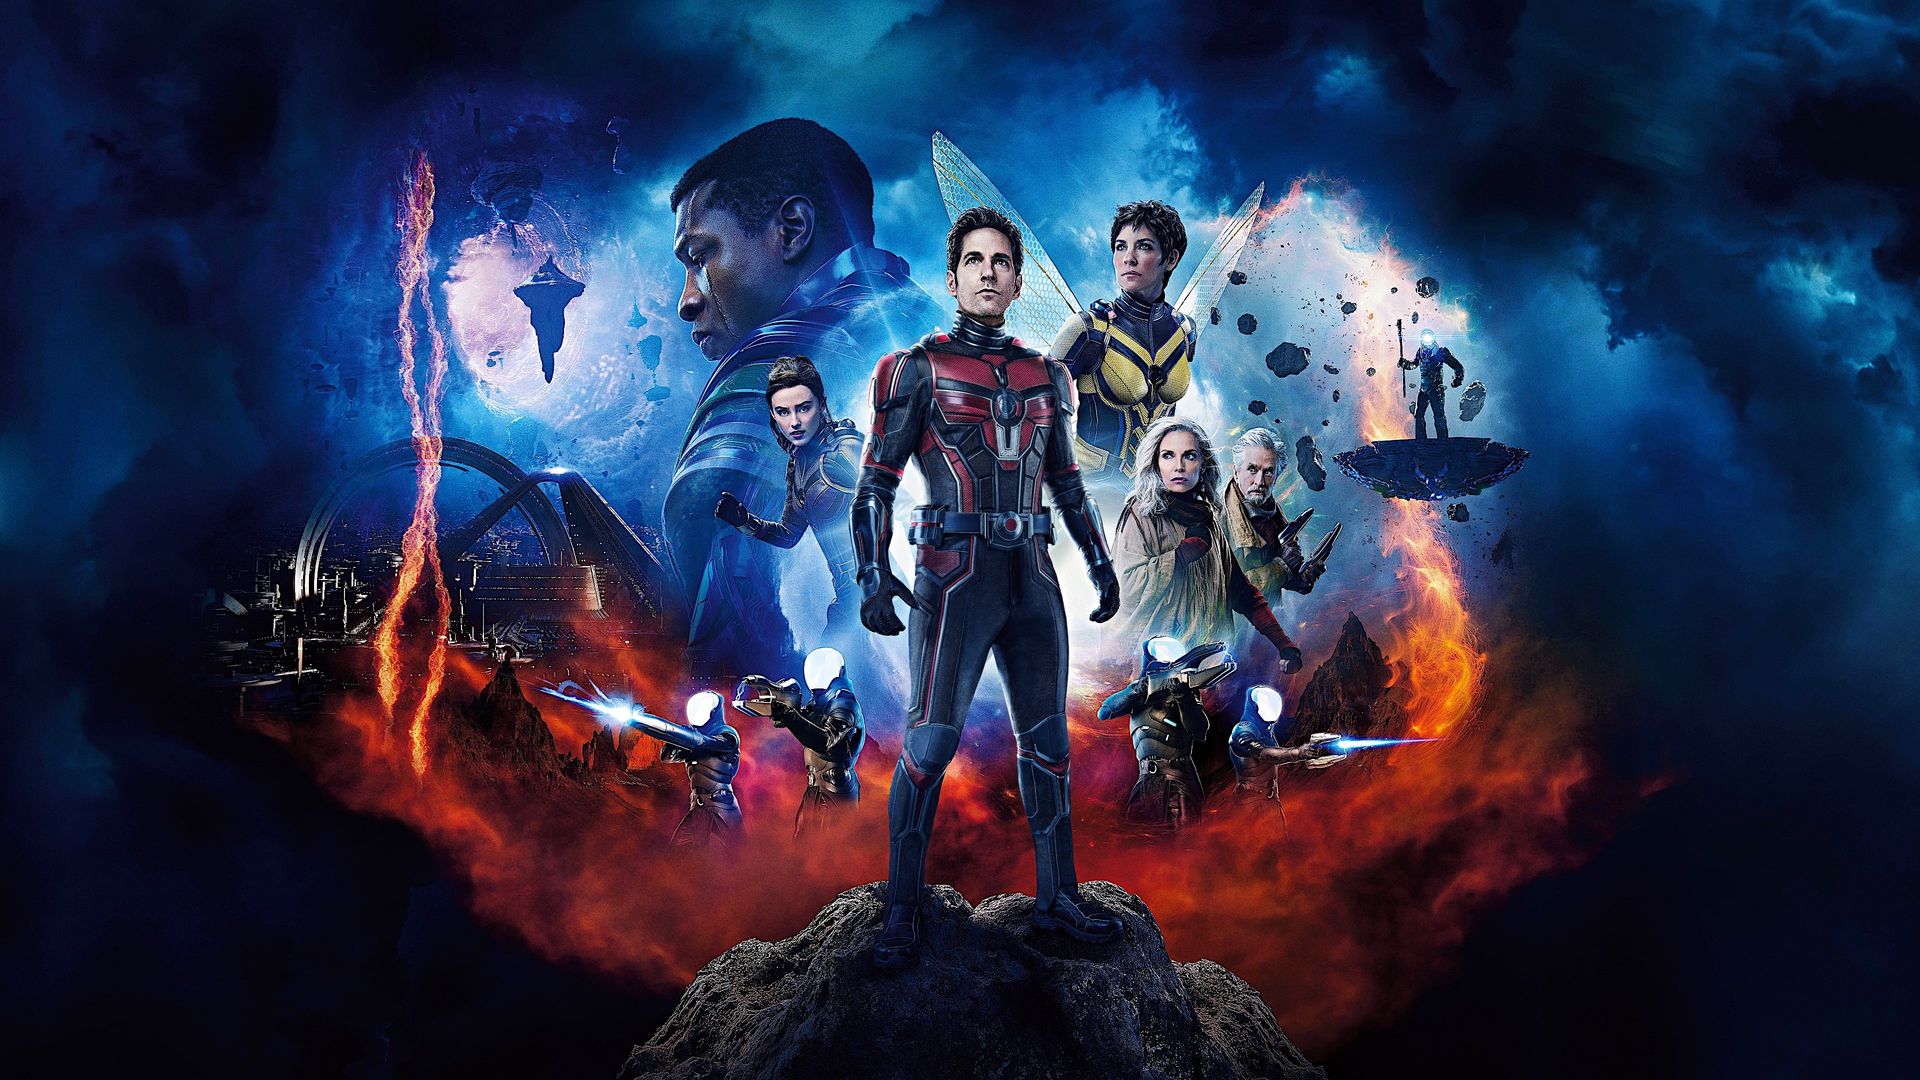 Ant-Man and the Wasp: Quantumania (2023): Where to Watch and Stream Online